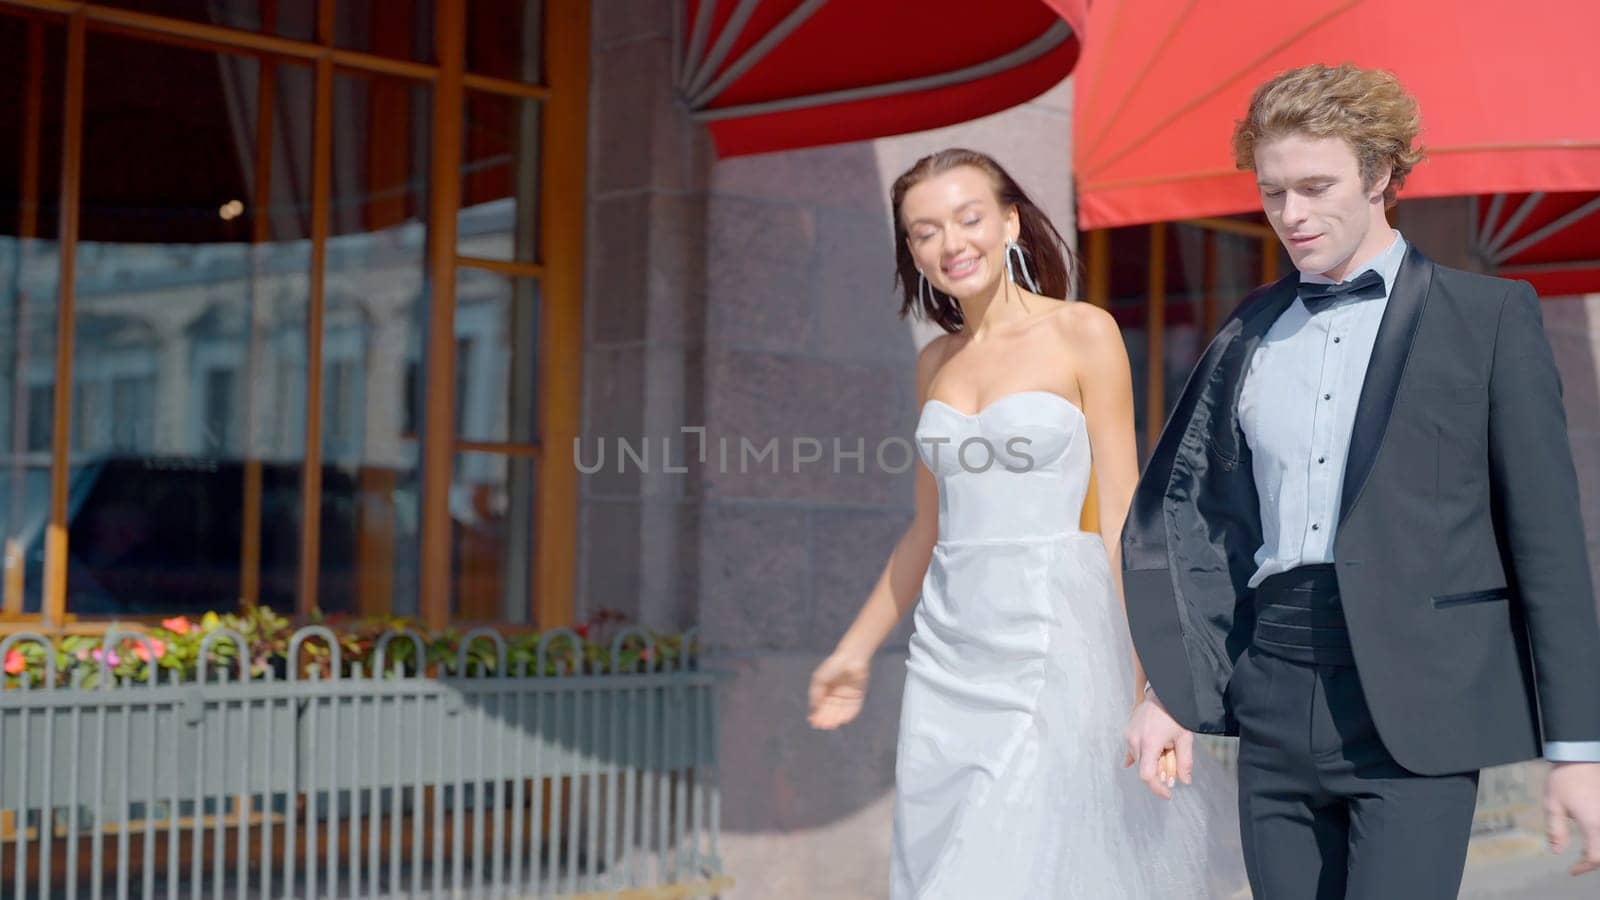 Wedding photo shoot on the street.Action.A bright and spectacular couple with a bride in a white dress with a neckline and long earrings and a man in a black suit on the street next to buildings. by Mediawhalestock